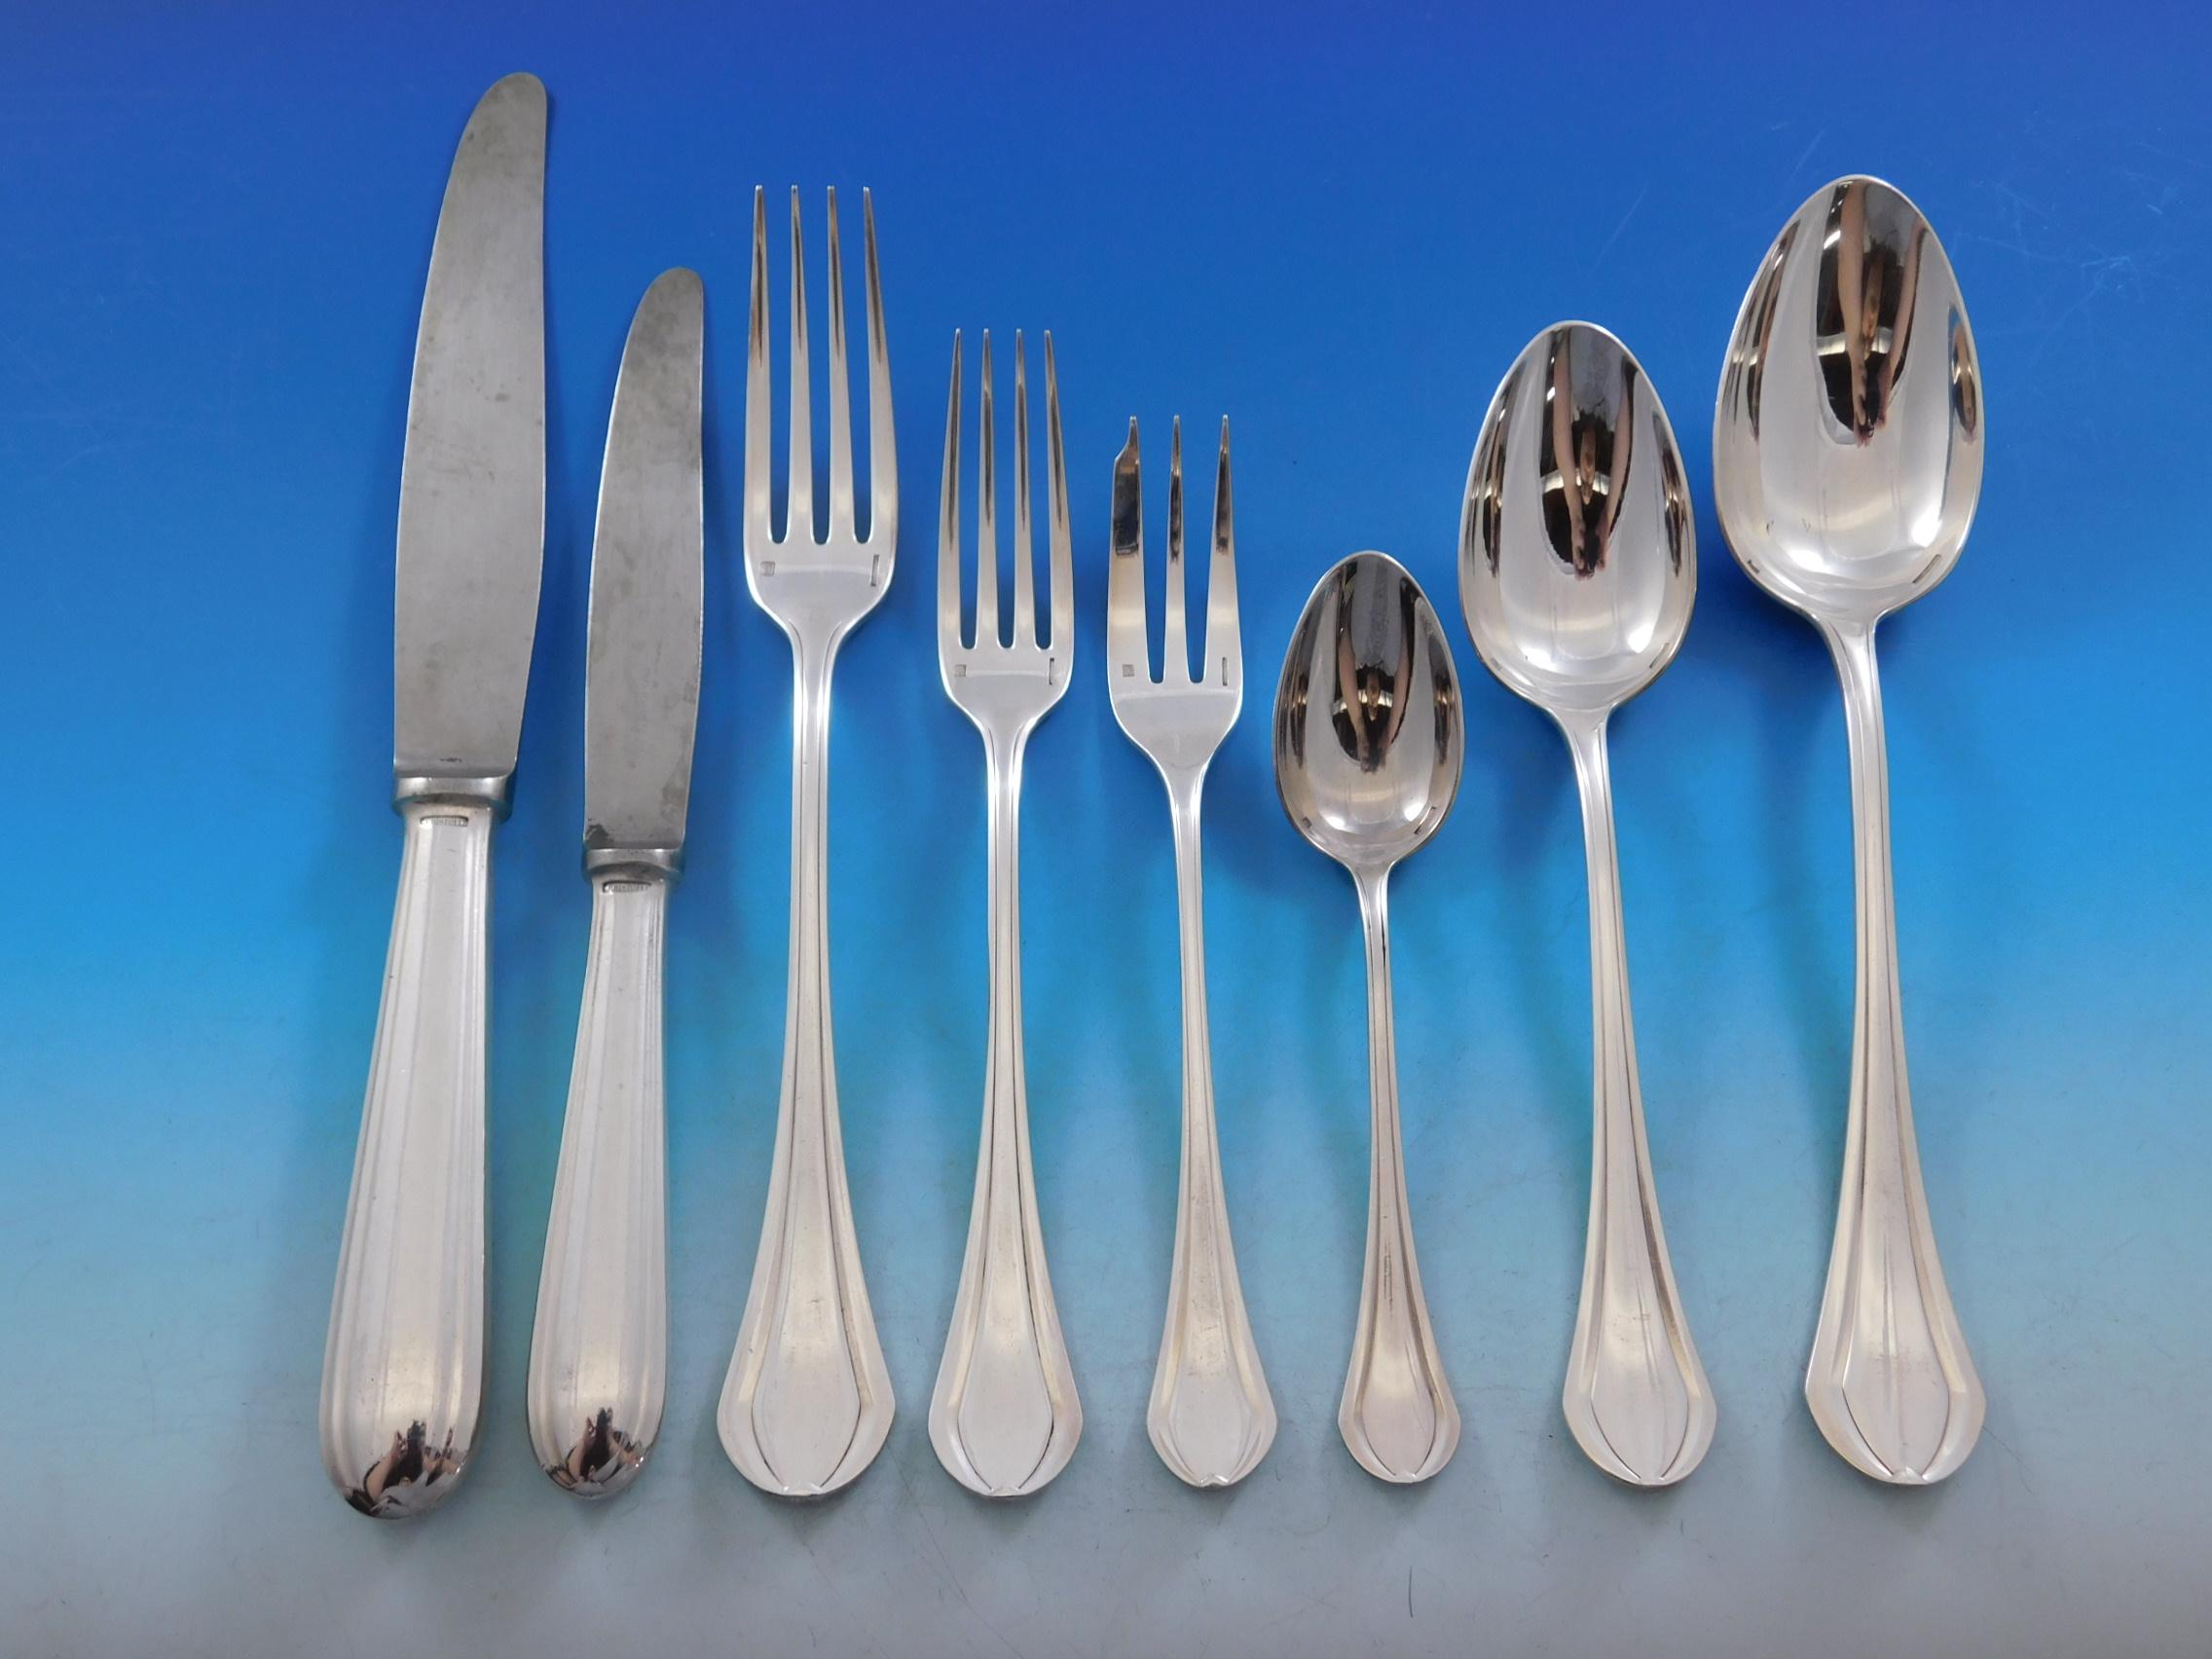 With a dedication to perfection and quality, Christofle flatware creations unite craftsmanship and modern technique, resulting in flatware to be handed down through generations. 


Rare Printania by Christofle France estate silverplate flatware set